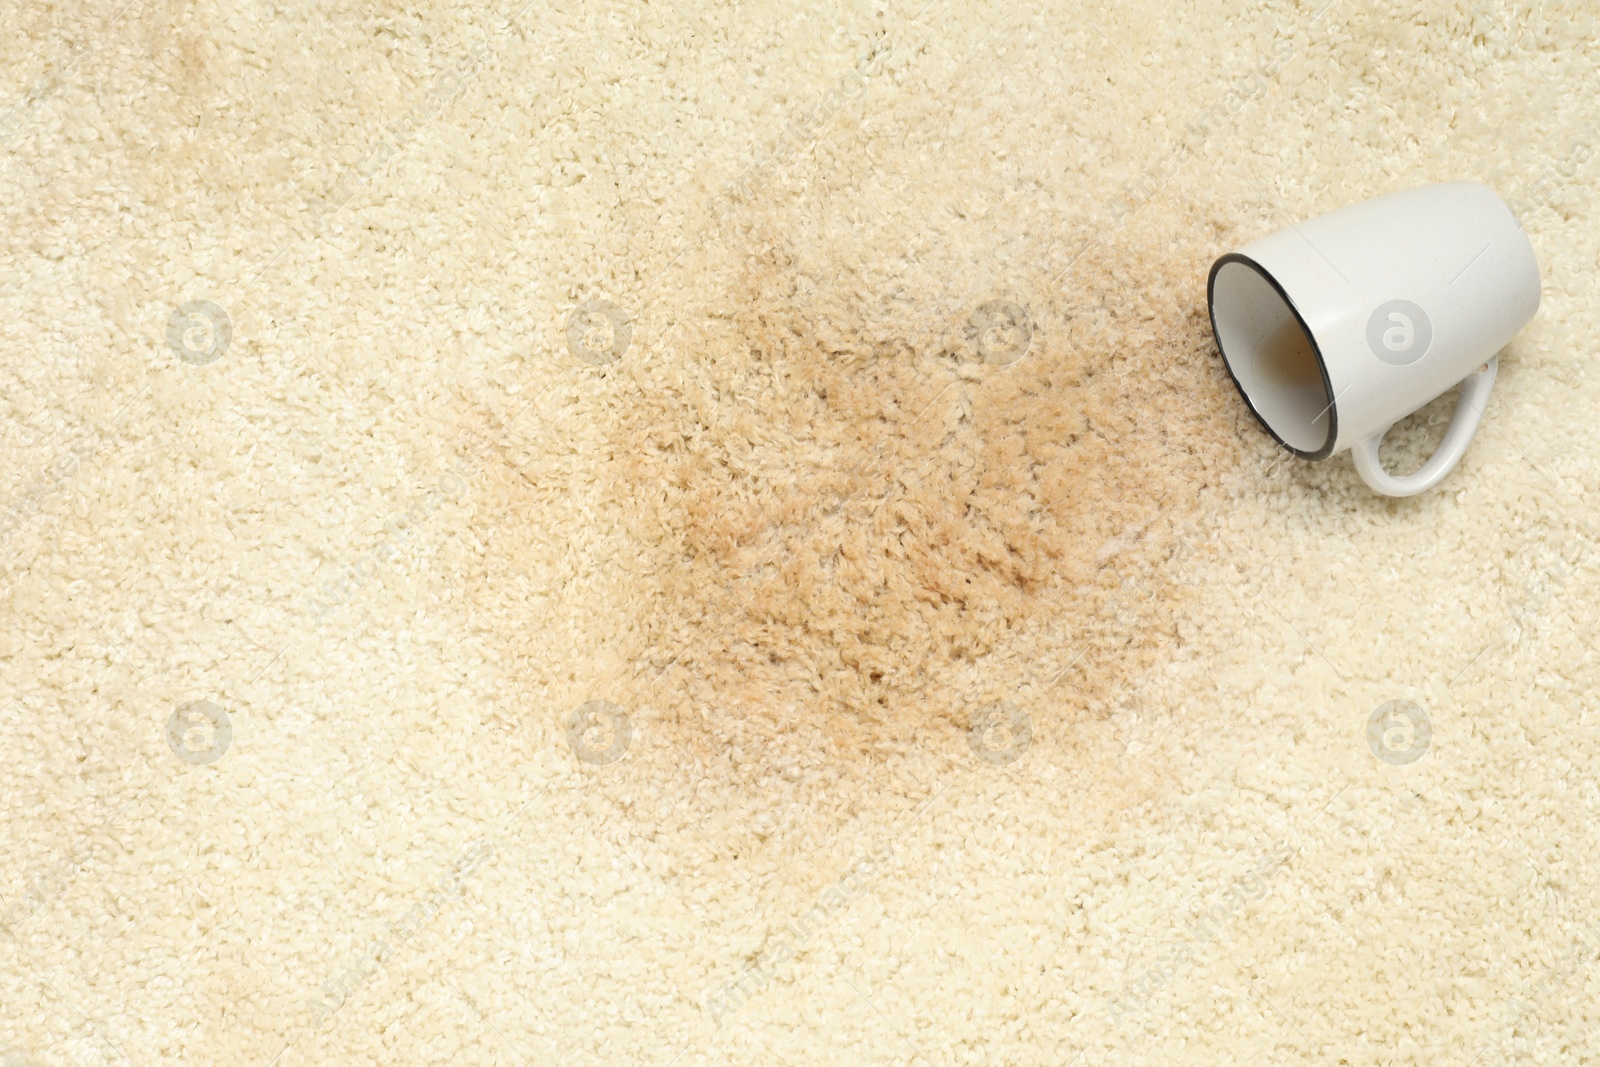 Photo of Overturned cup and spilled drink on beige carpet, top view. Space for text